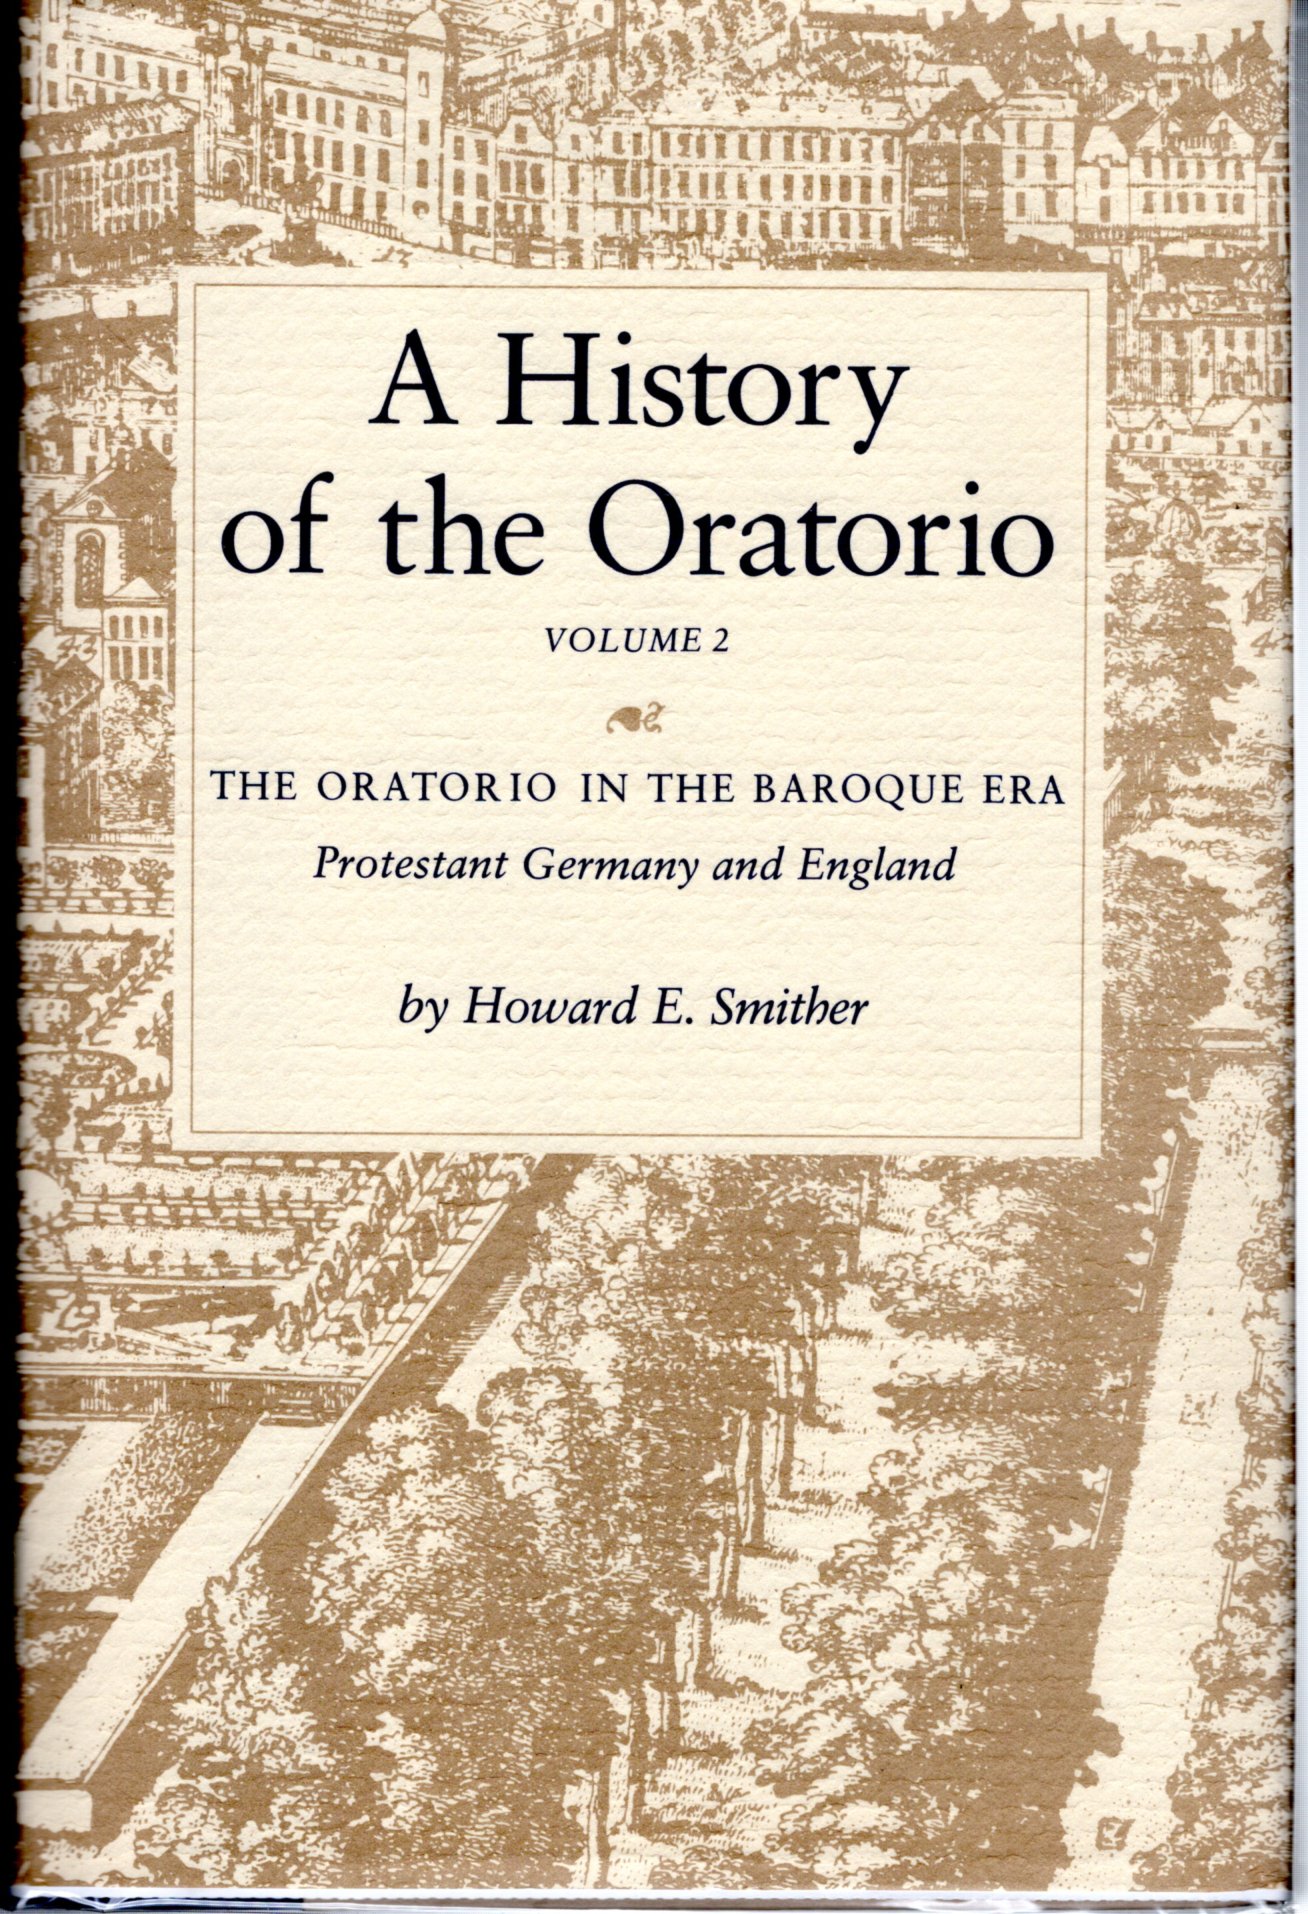 A History of the Oratorio: Vol.ume 2 (two): The Oratorio in the Baroque Era Protestant Germany and Englands - Smither, Howard E. (Howard Elbert)